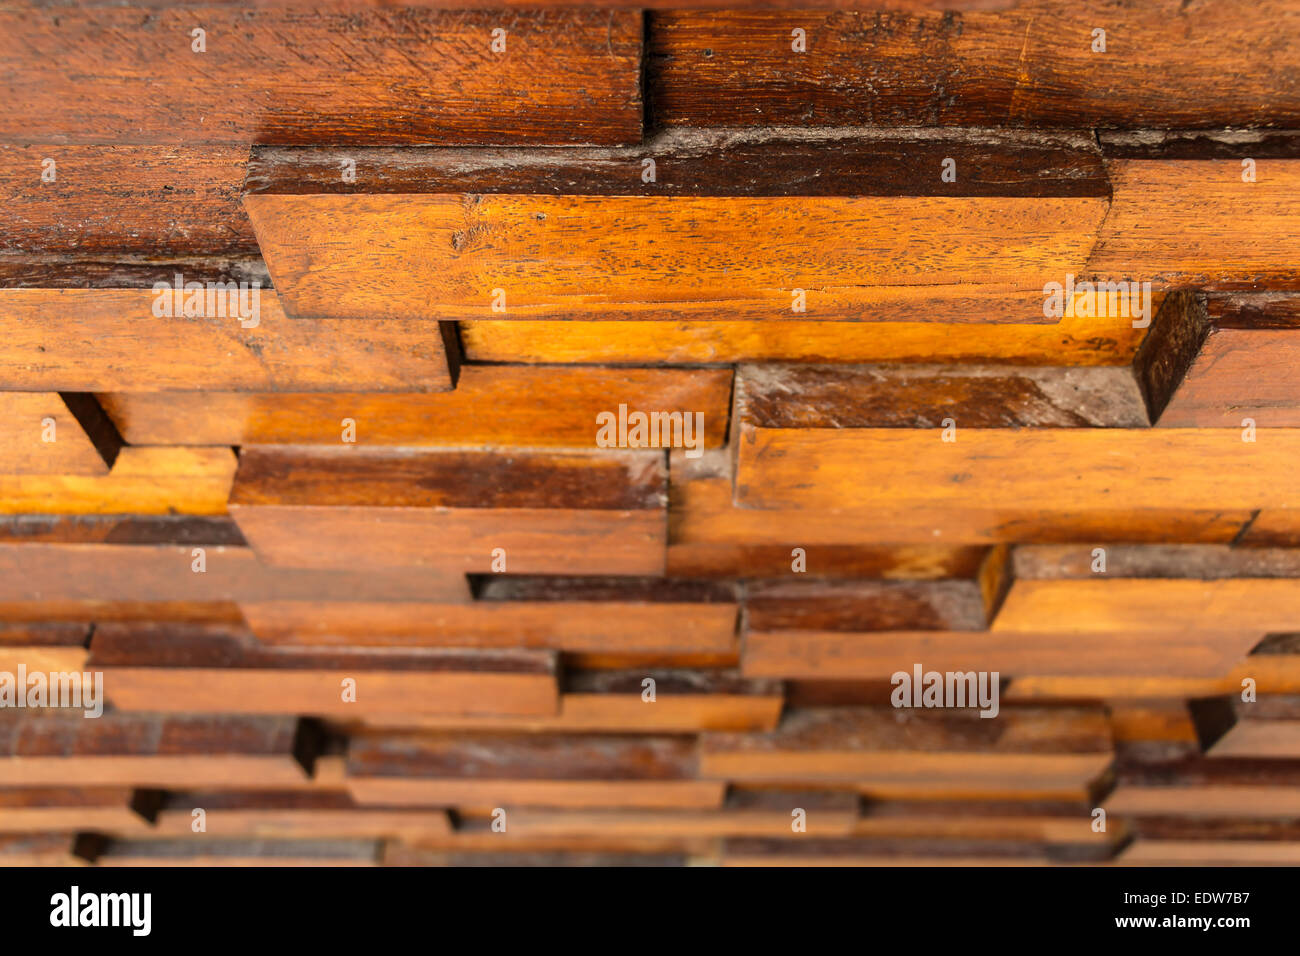 texture of old wooden wall and square wood overlap Stock Photo